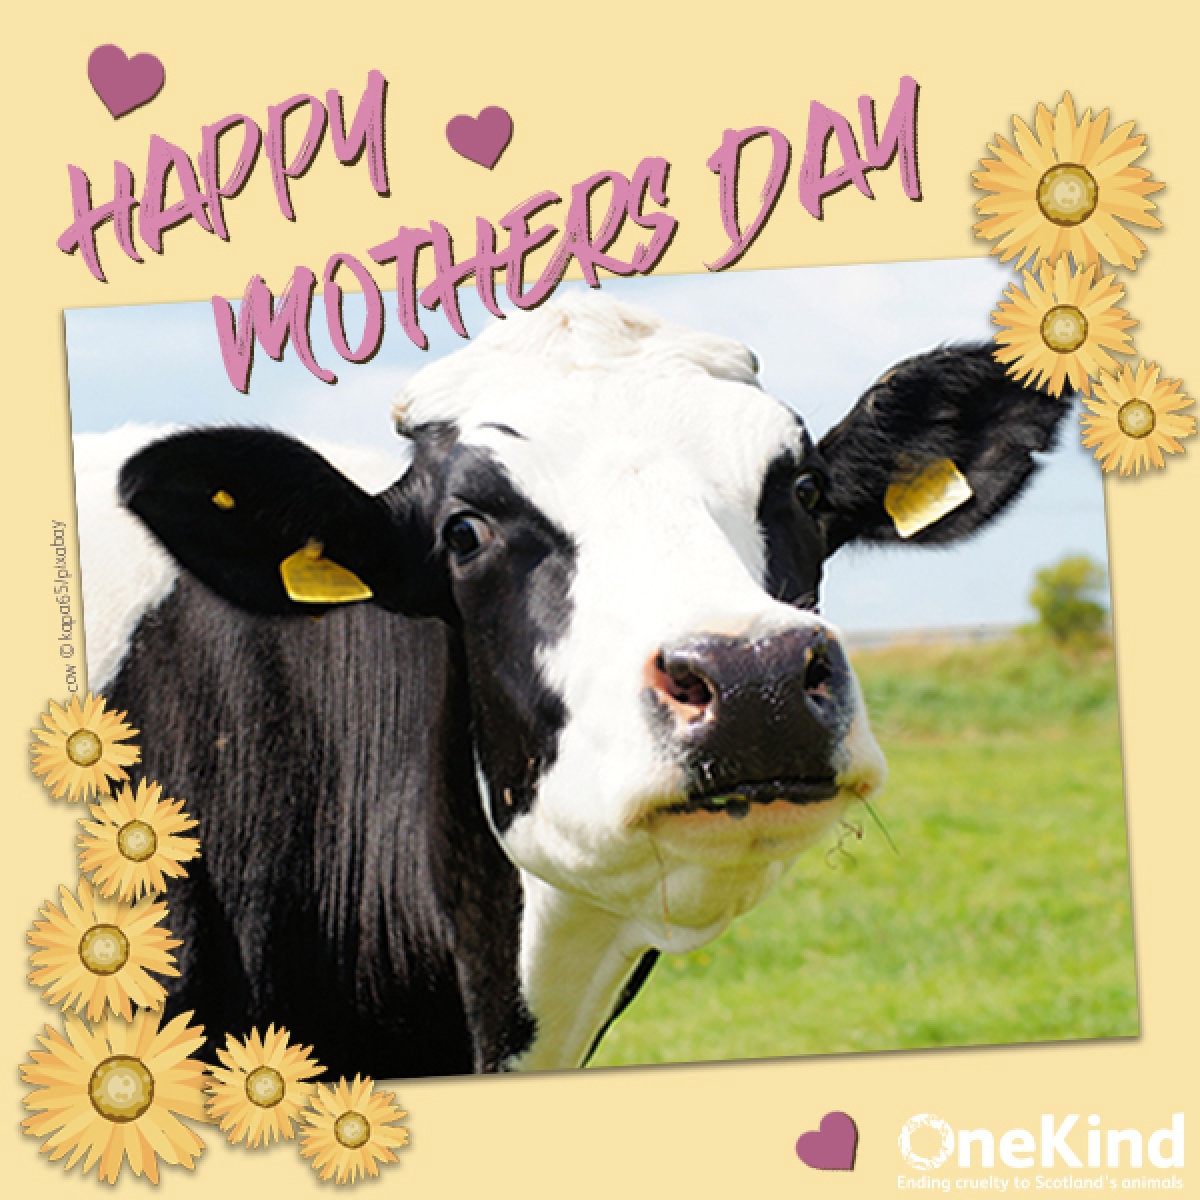 Send Mother's Day E-cards eCards